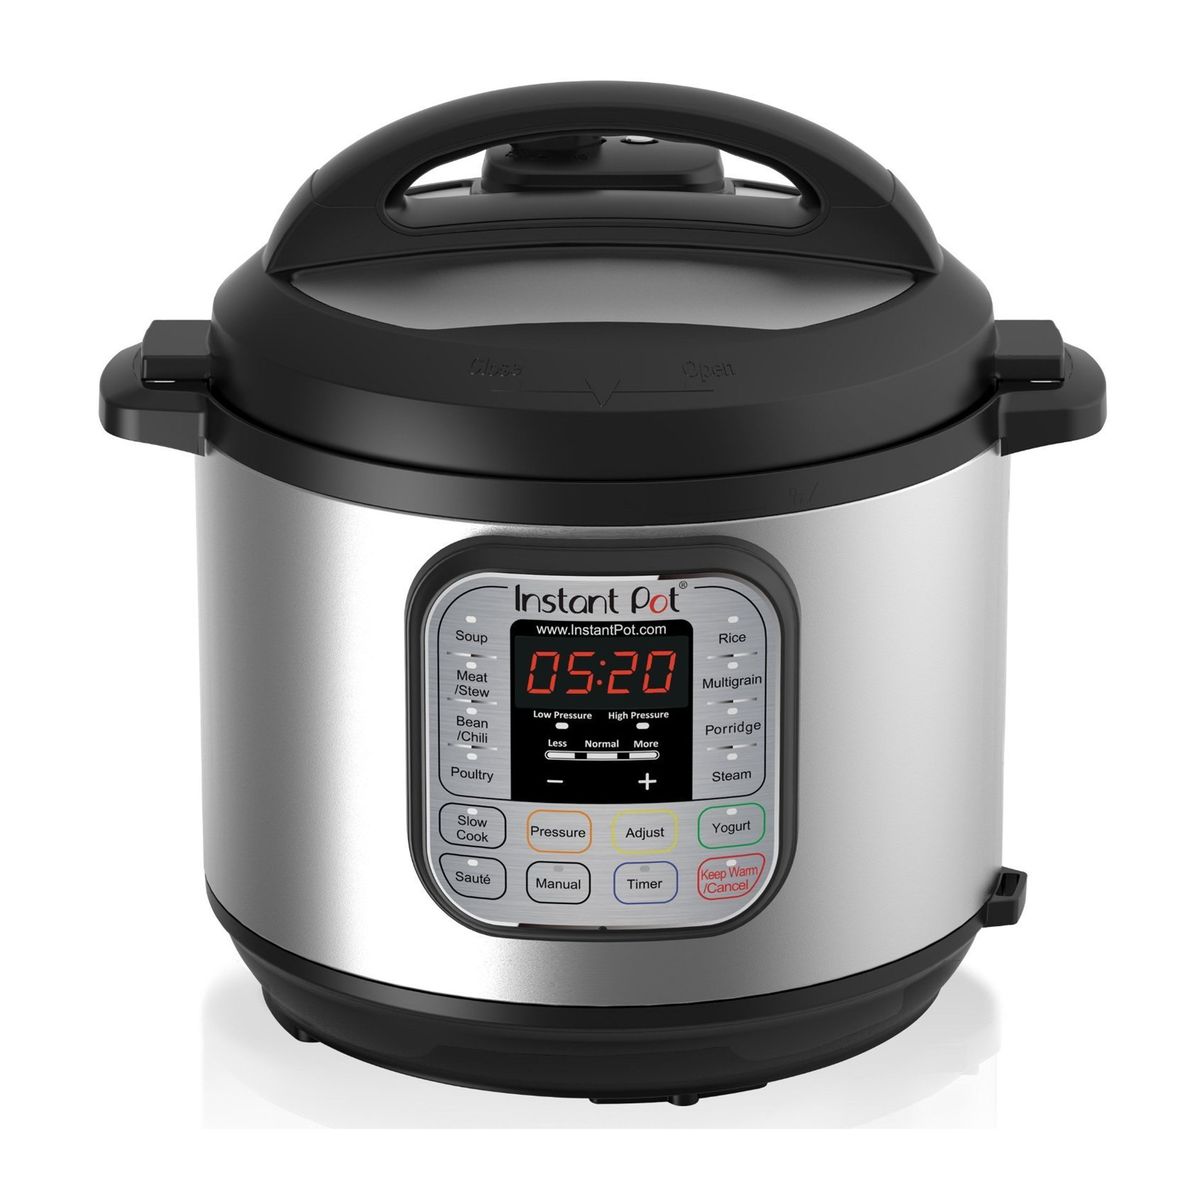 https://hips.hearstapps.com/ghk.h-cdn.co/assets/17/01/4000x4000/square-1483565181-instant-pot-programmable-electric-pressure-cooker-ip0-duo60.jpg?resize=1200:*